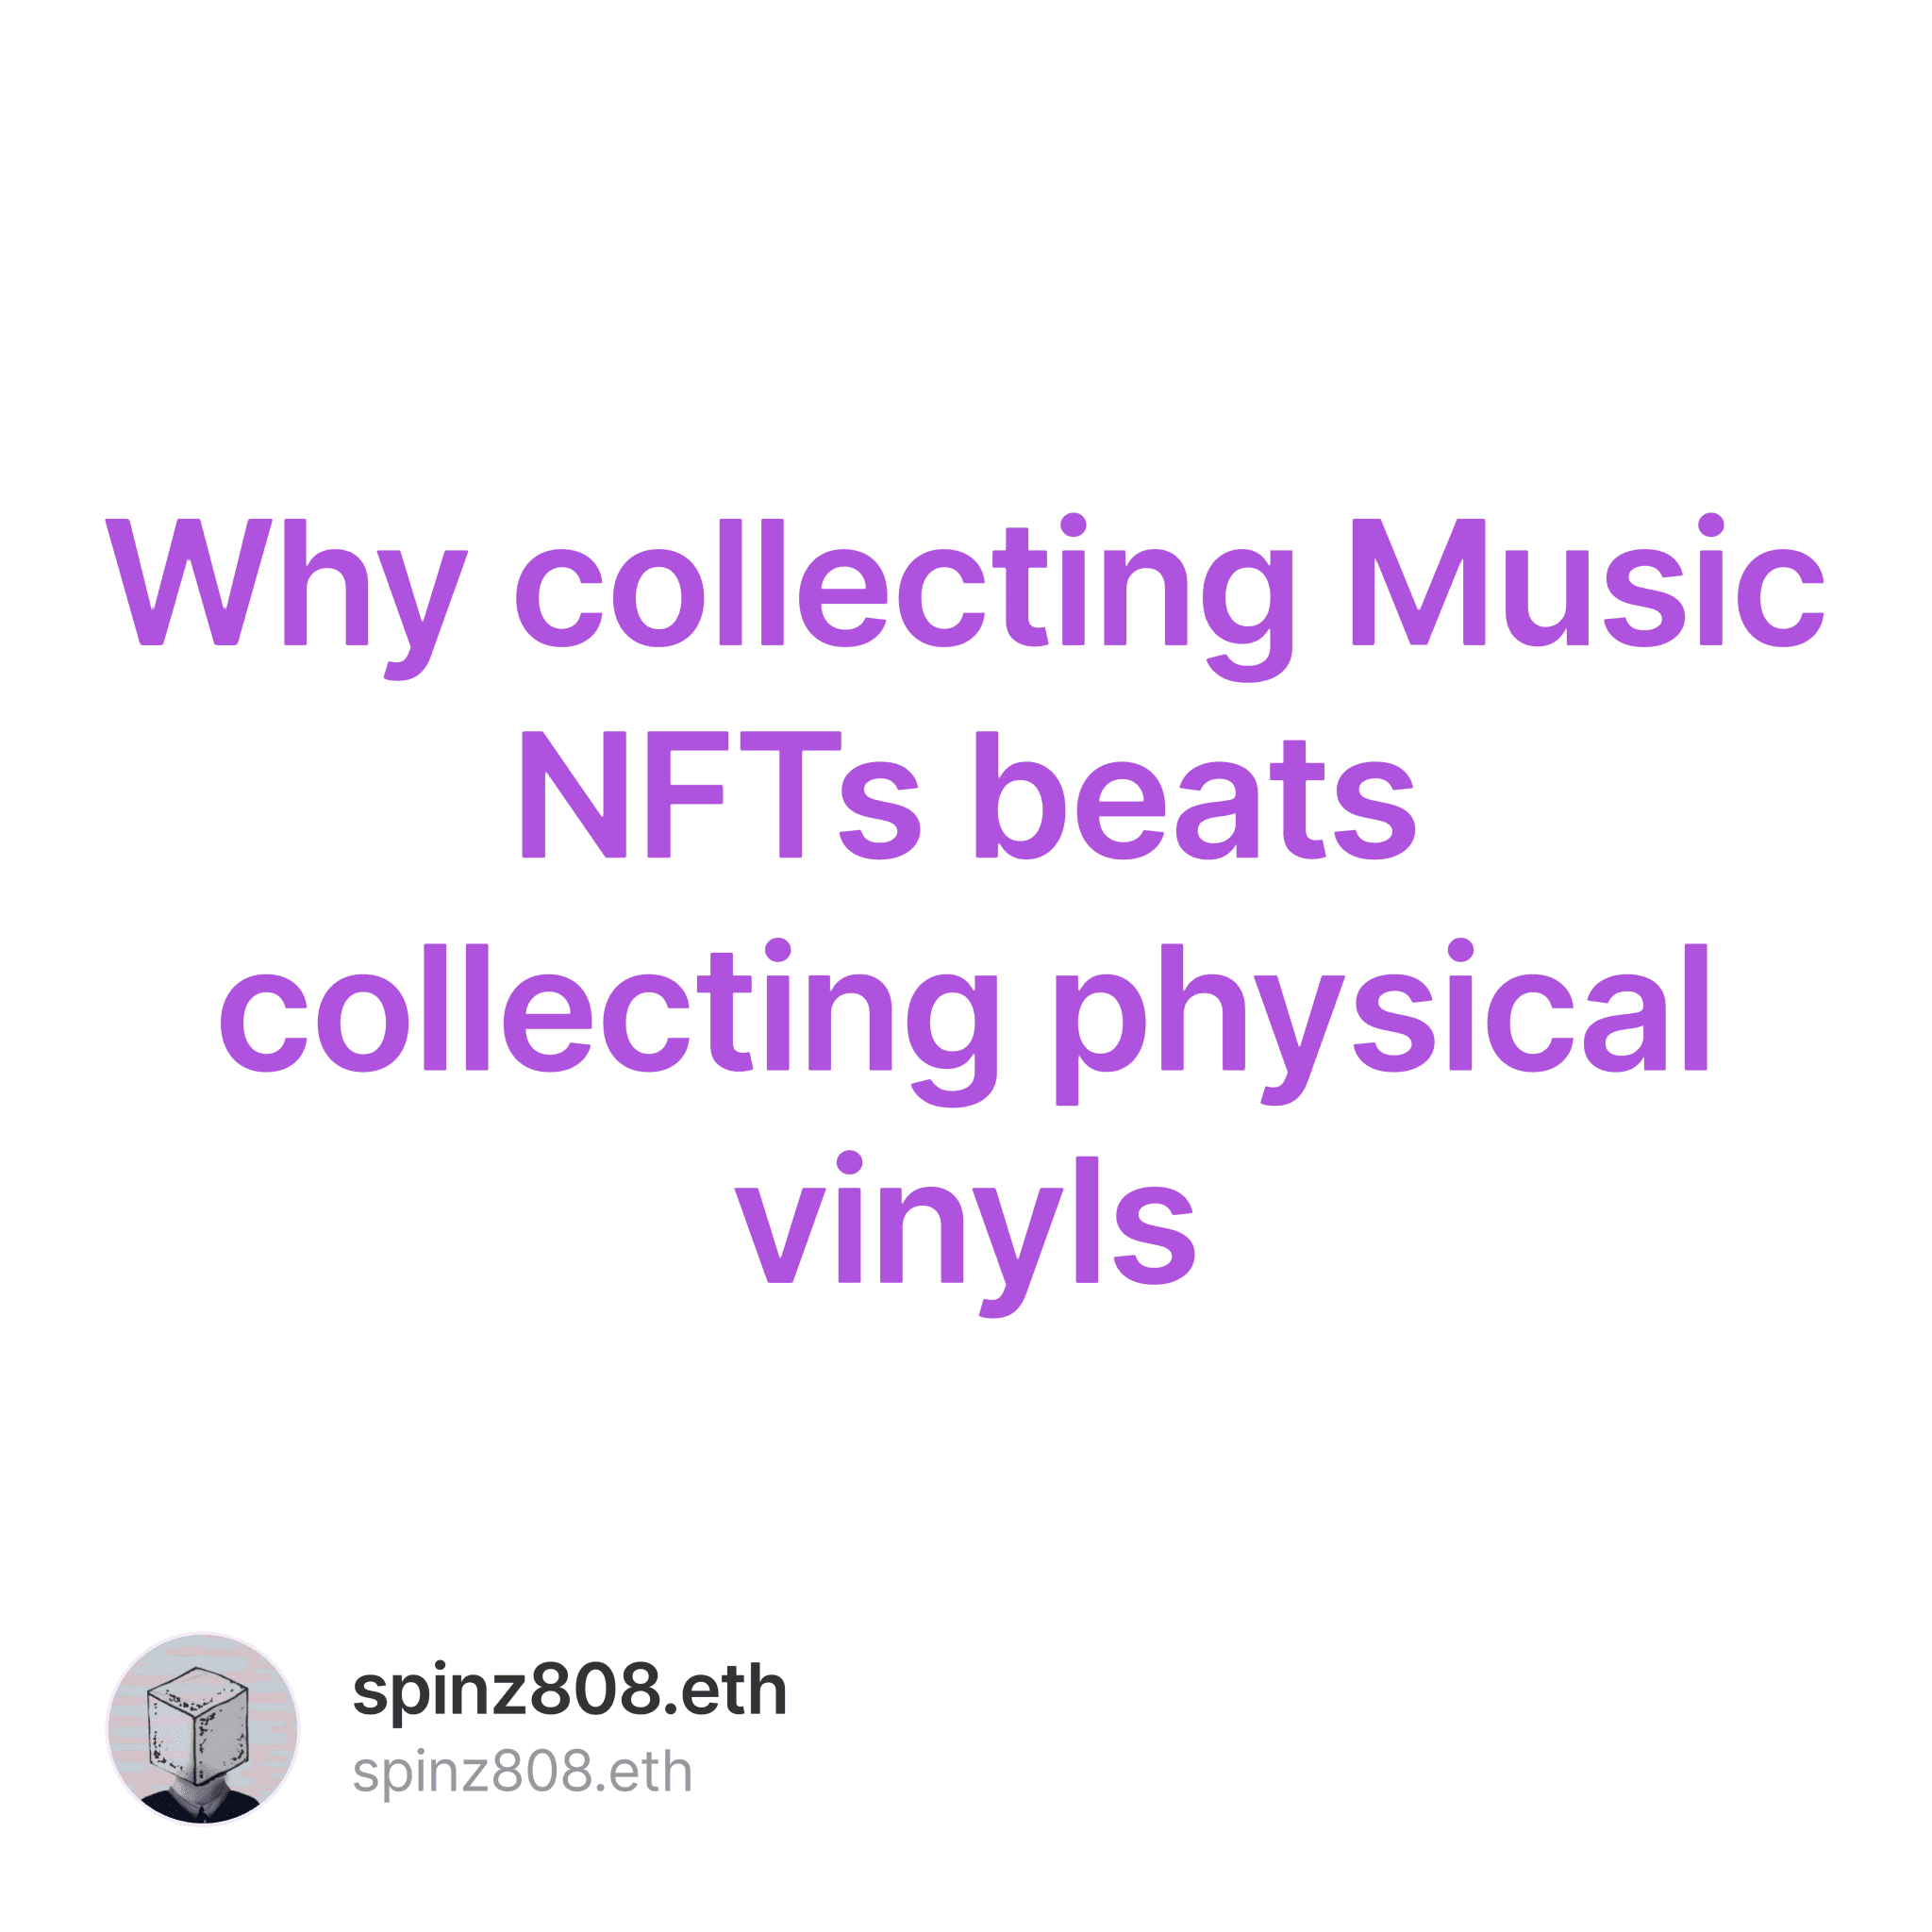 Why collecting Music NFTs beats collecting physical vinyls 32/100